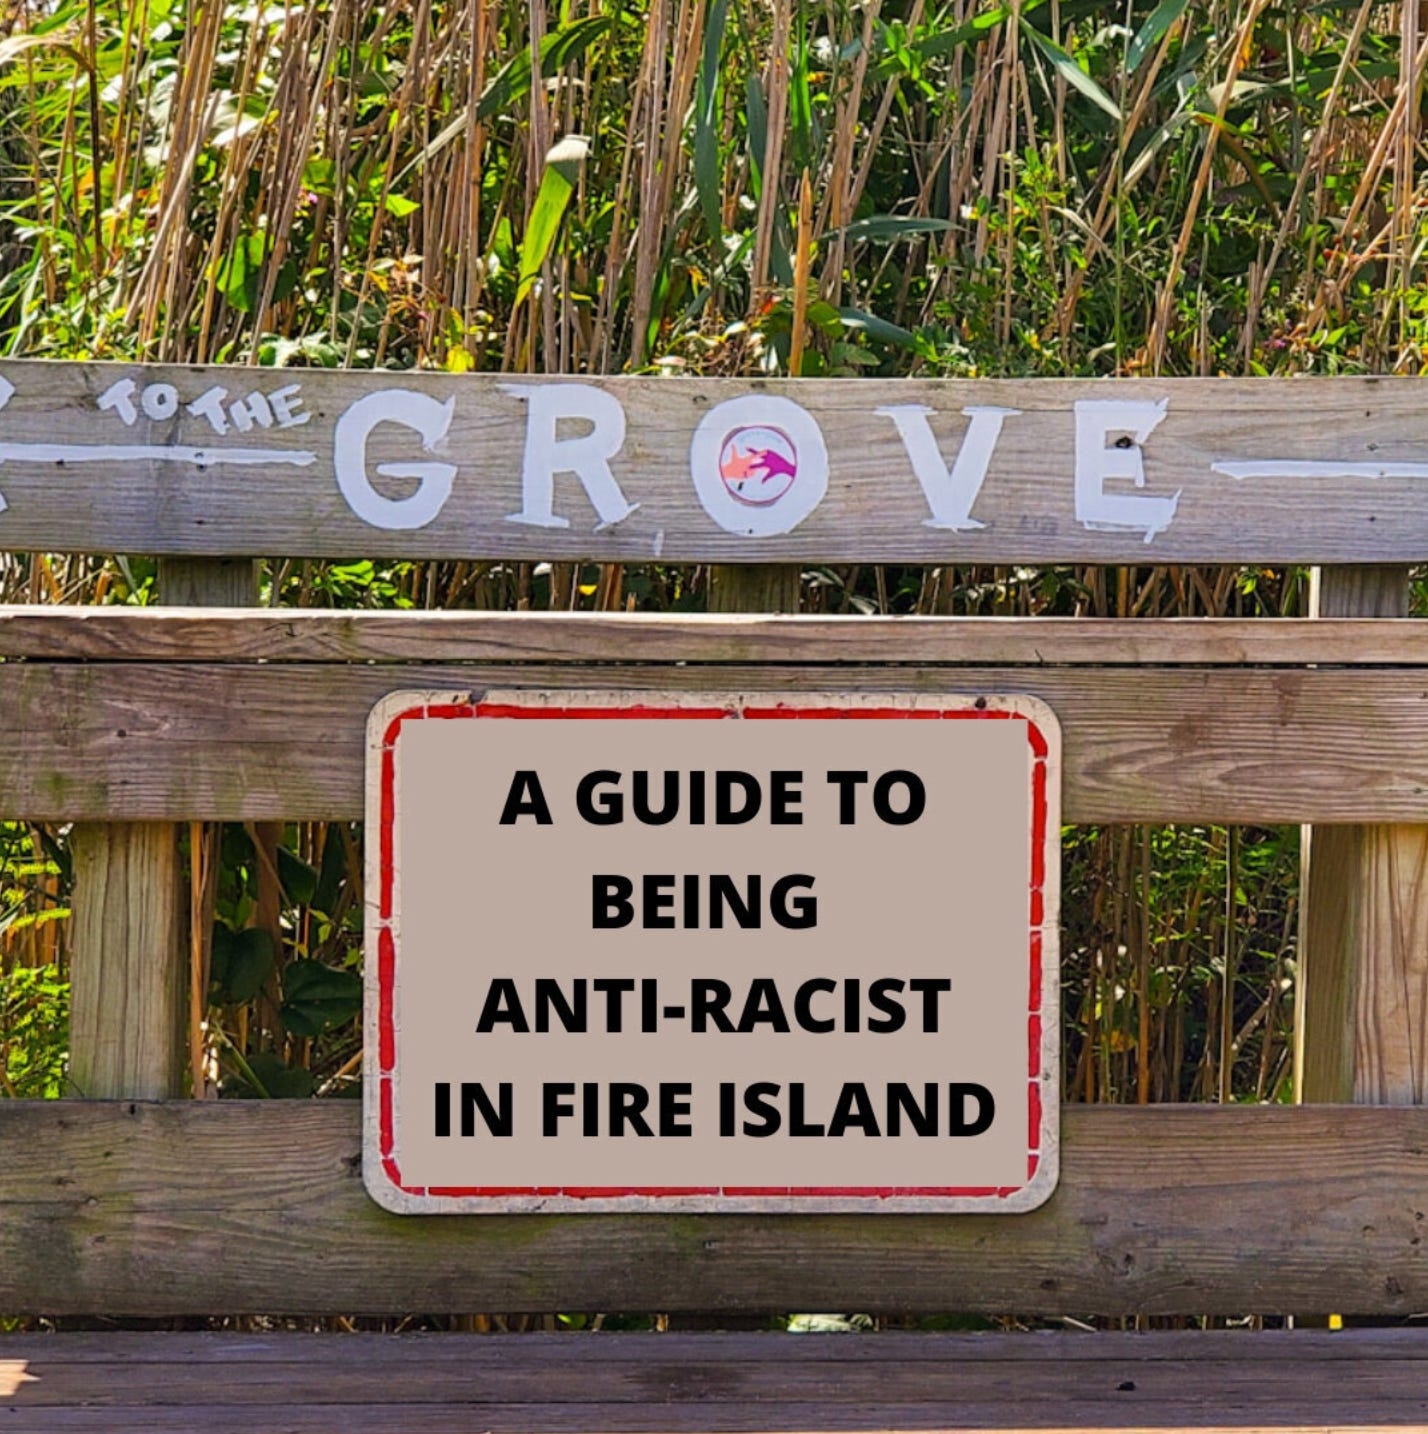 A weathered wooden sign reading "To The Grove" with tall grasses in the background. Below it is a red-bordered sign stating "A Guide To Being Anti-Racist in Fire Island". The "O" in "Grove" contains an image of two intersecting hands in an action that symbolizes scissoring. One hand is beige and one is purple.